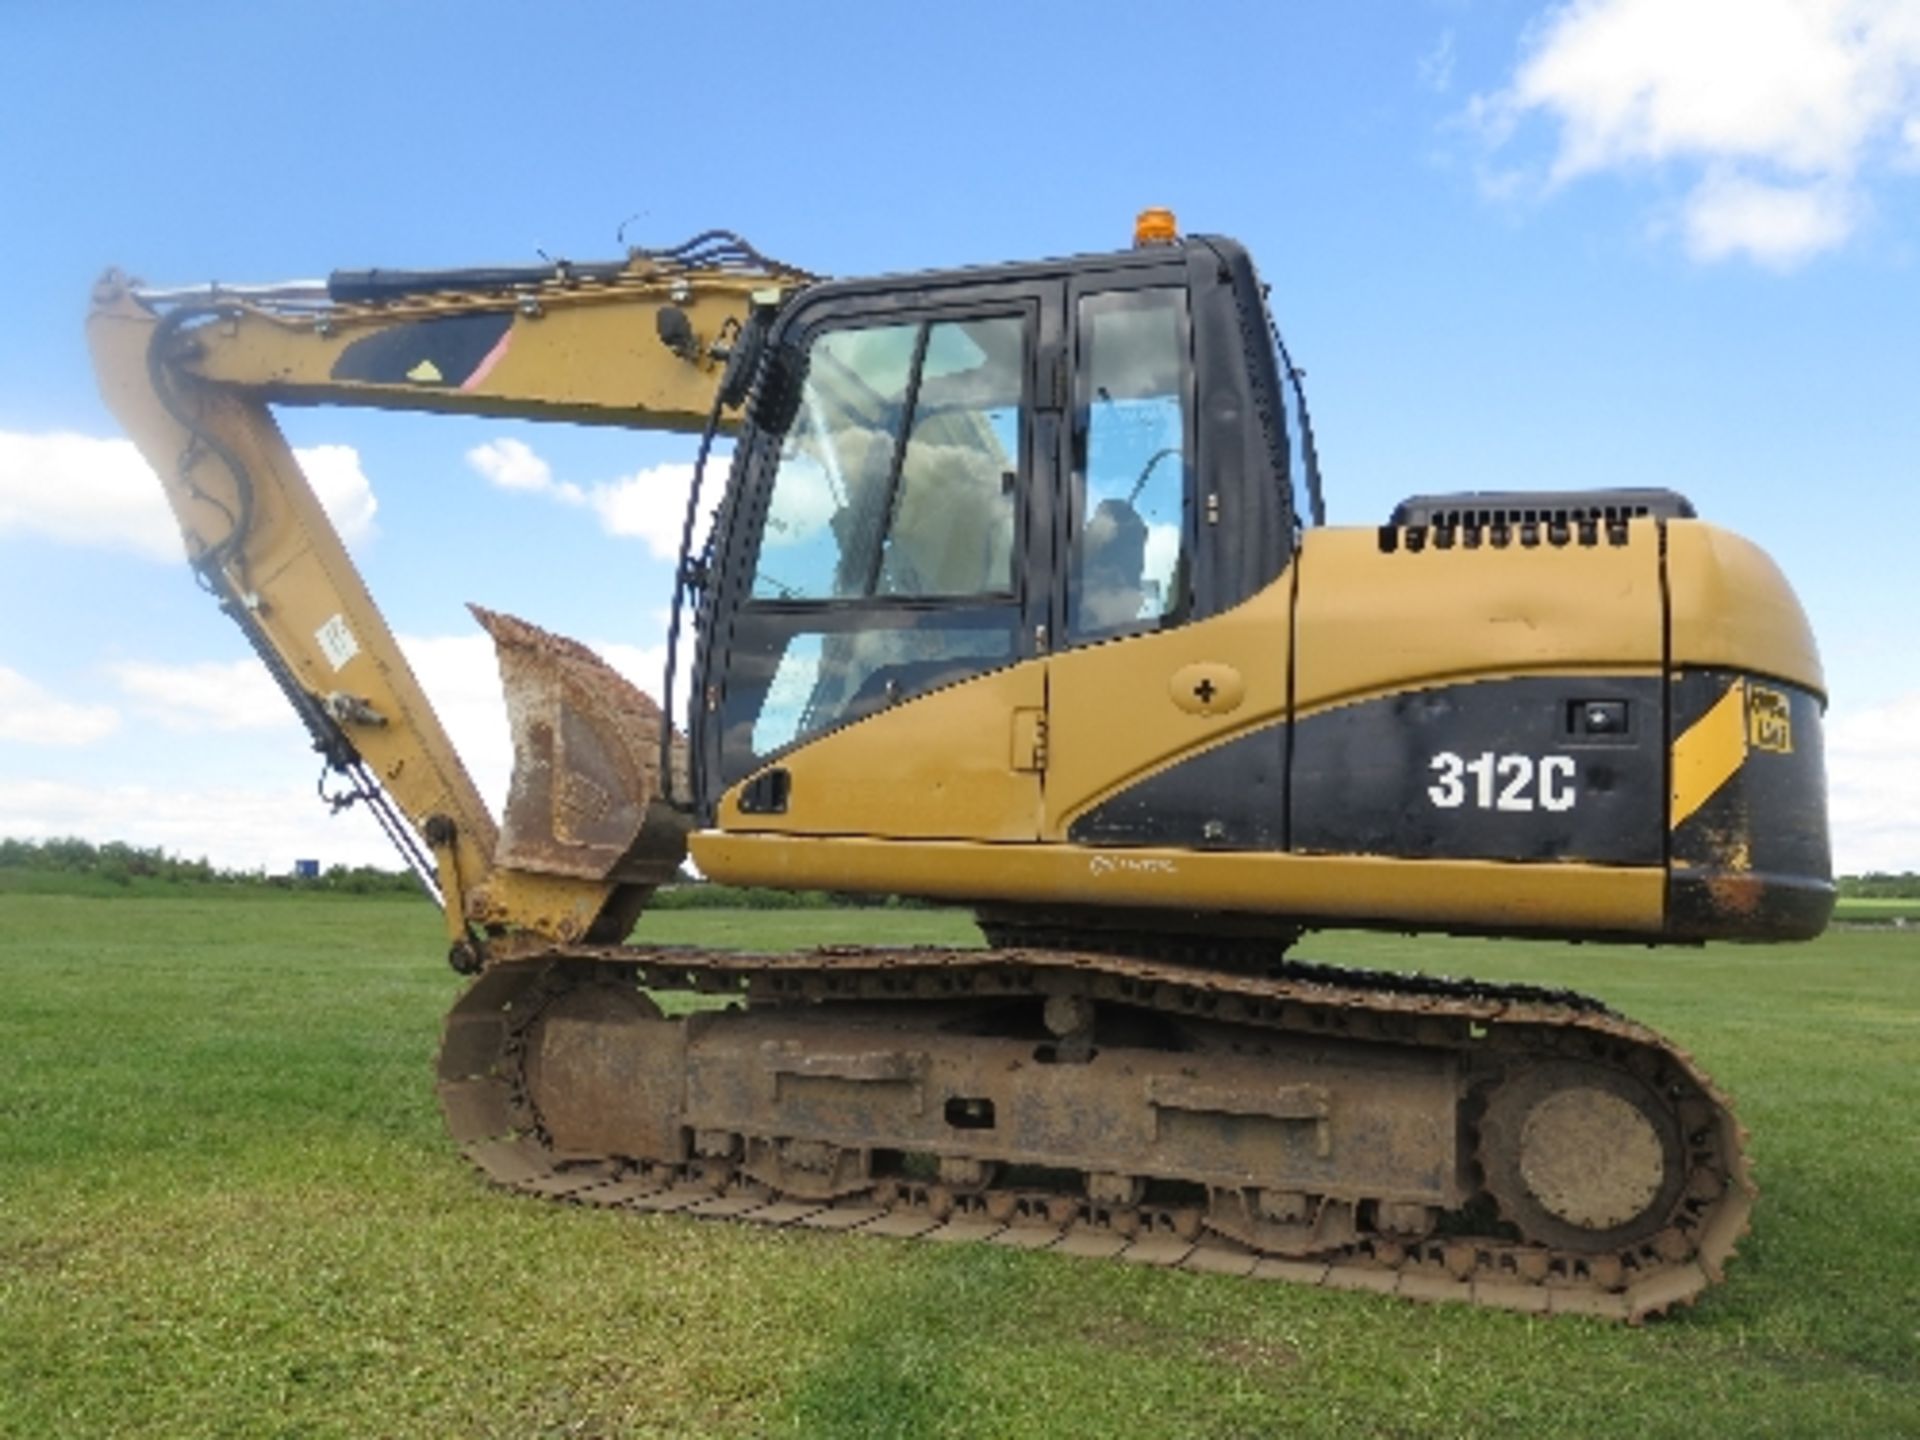 Caterpillar 312C excavator 6957 hrs  149537
BELIEVED 2007
ALL LOTS are SOLD AS SEEN WITHOUT